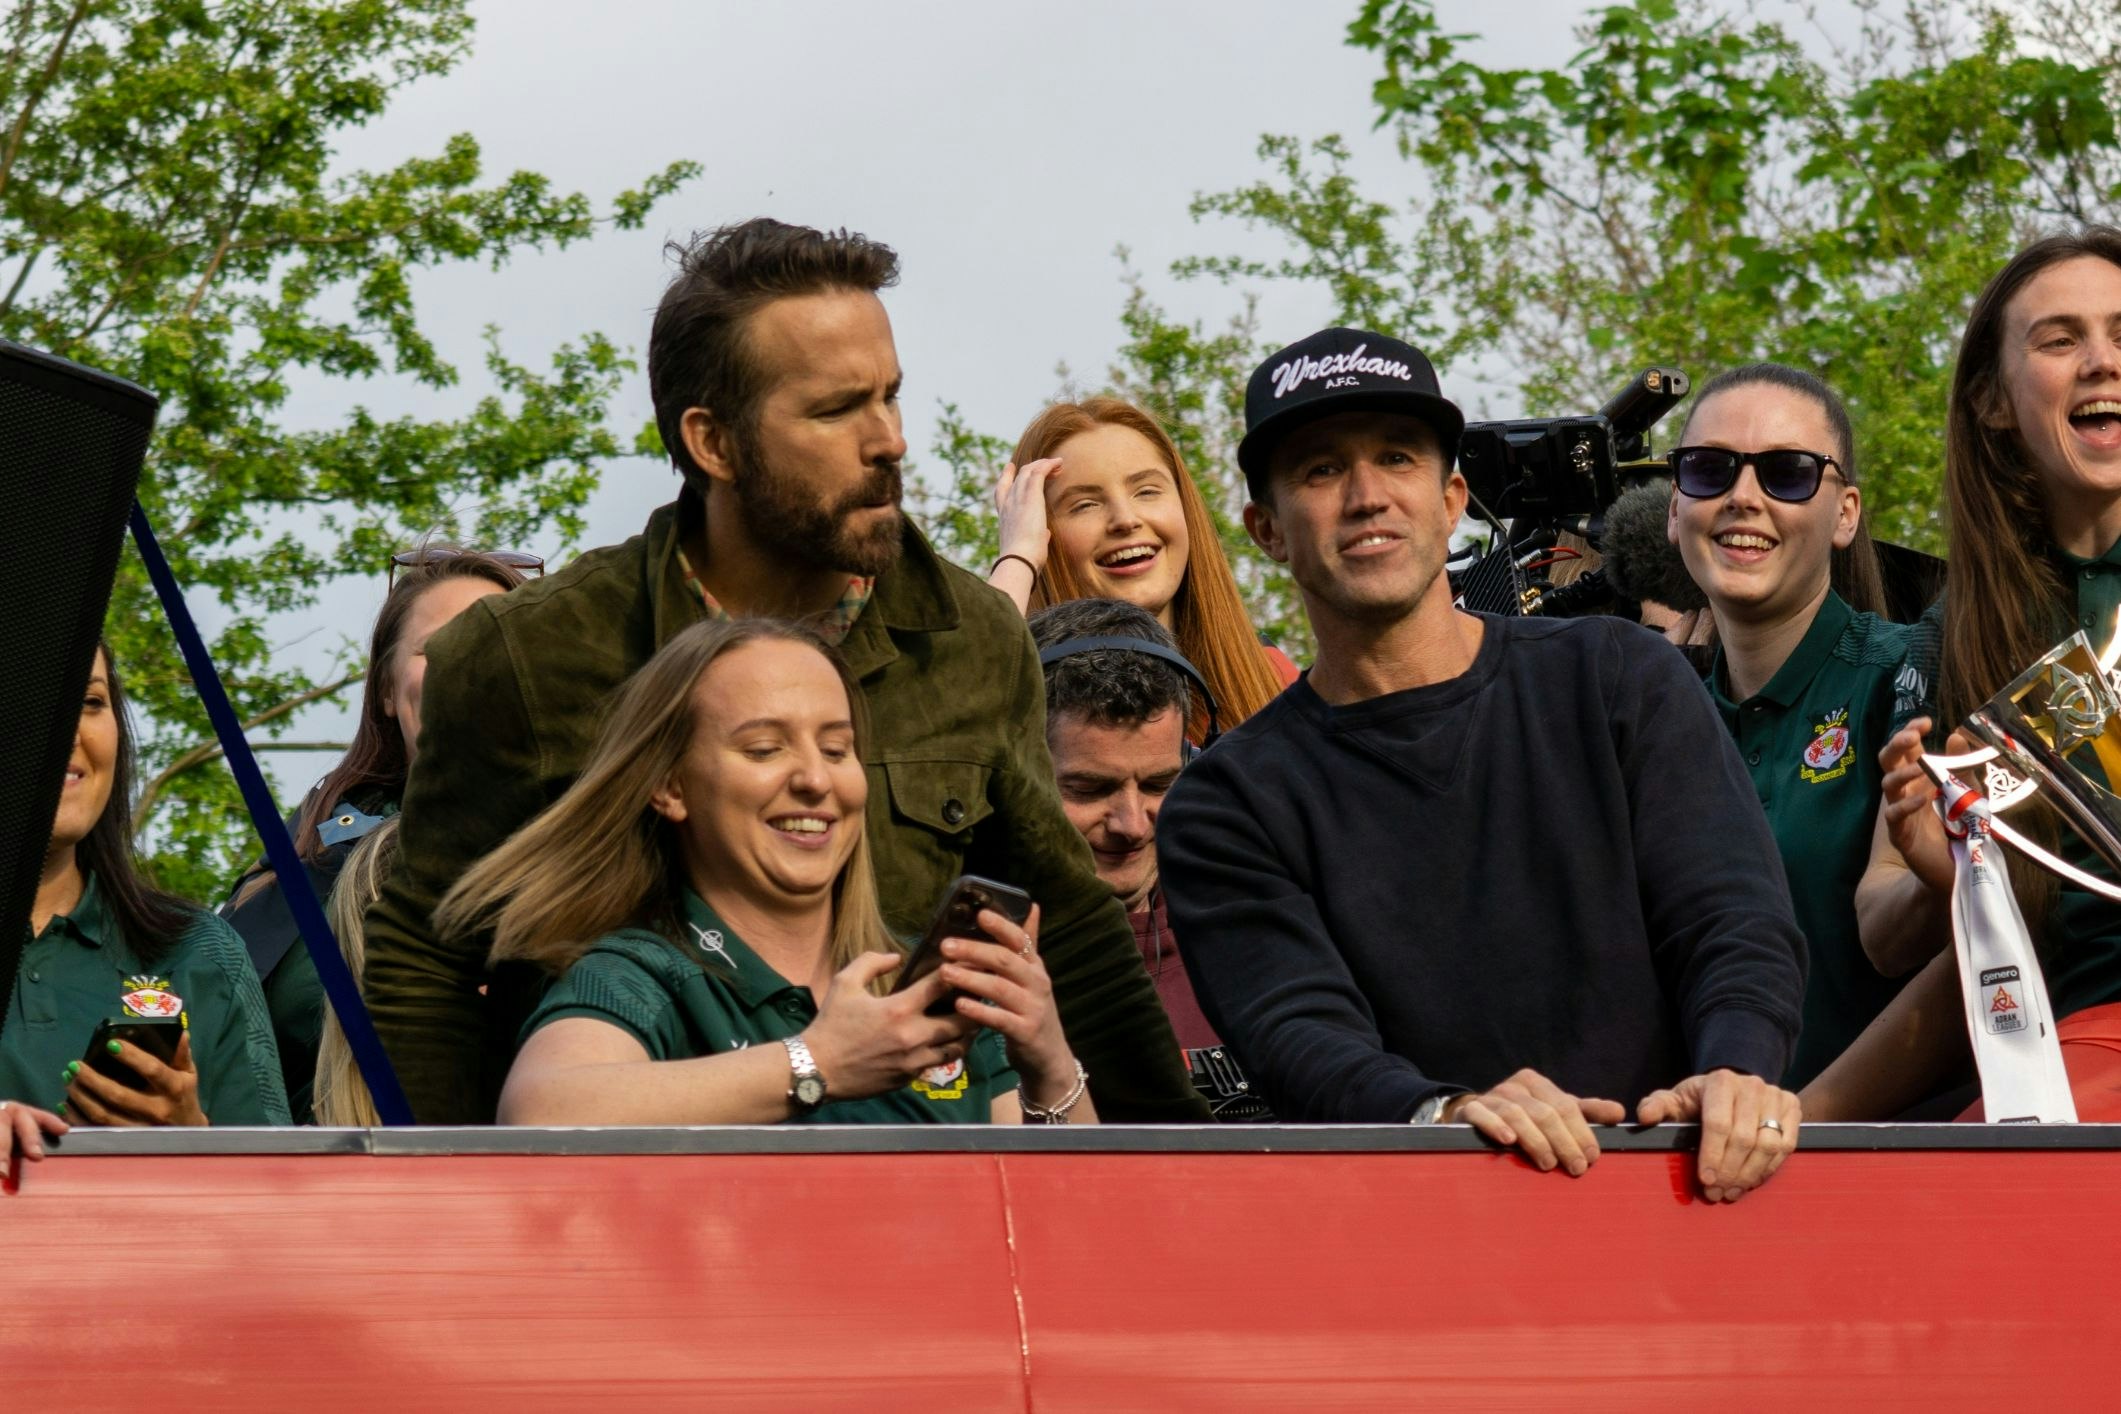 It’s Always Sunny in Philadelphia actor Rob McElhenney, 46 [right], and Deadpool star Ryan Reynolds, 46 [left], are co-owners of Wrexham Football Club, with the documentary Welcome to Wrexham (2022) available to stream on Disney+. [Source: WXM Photography]
